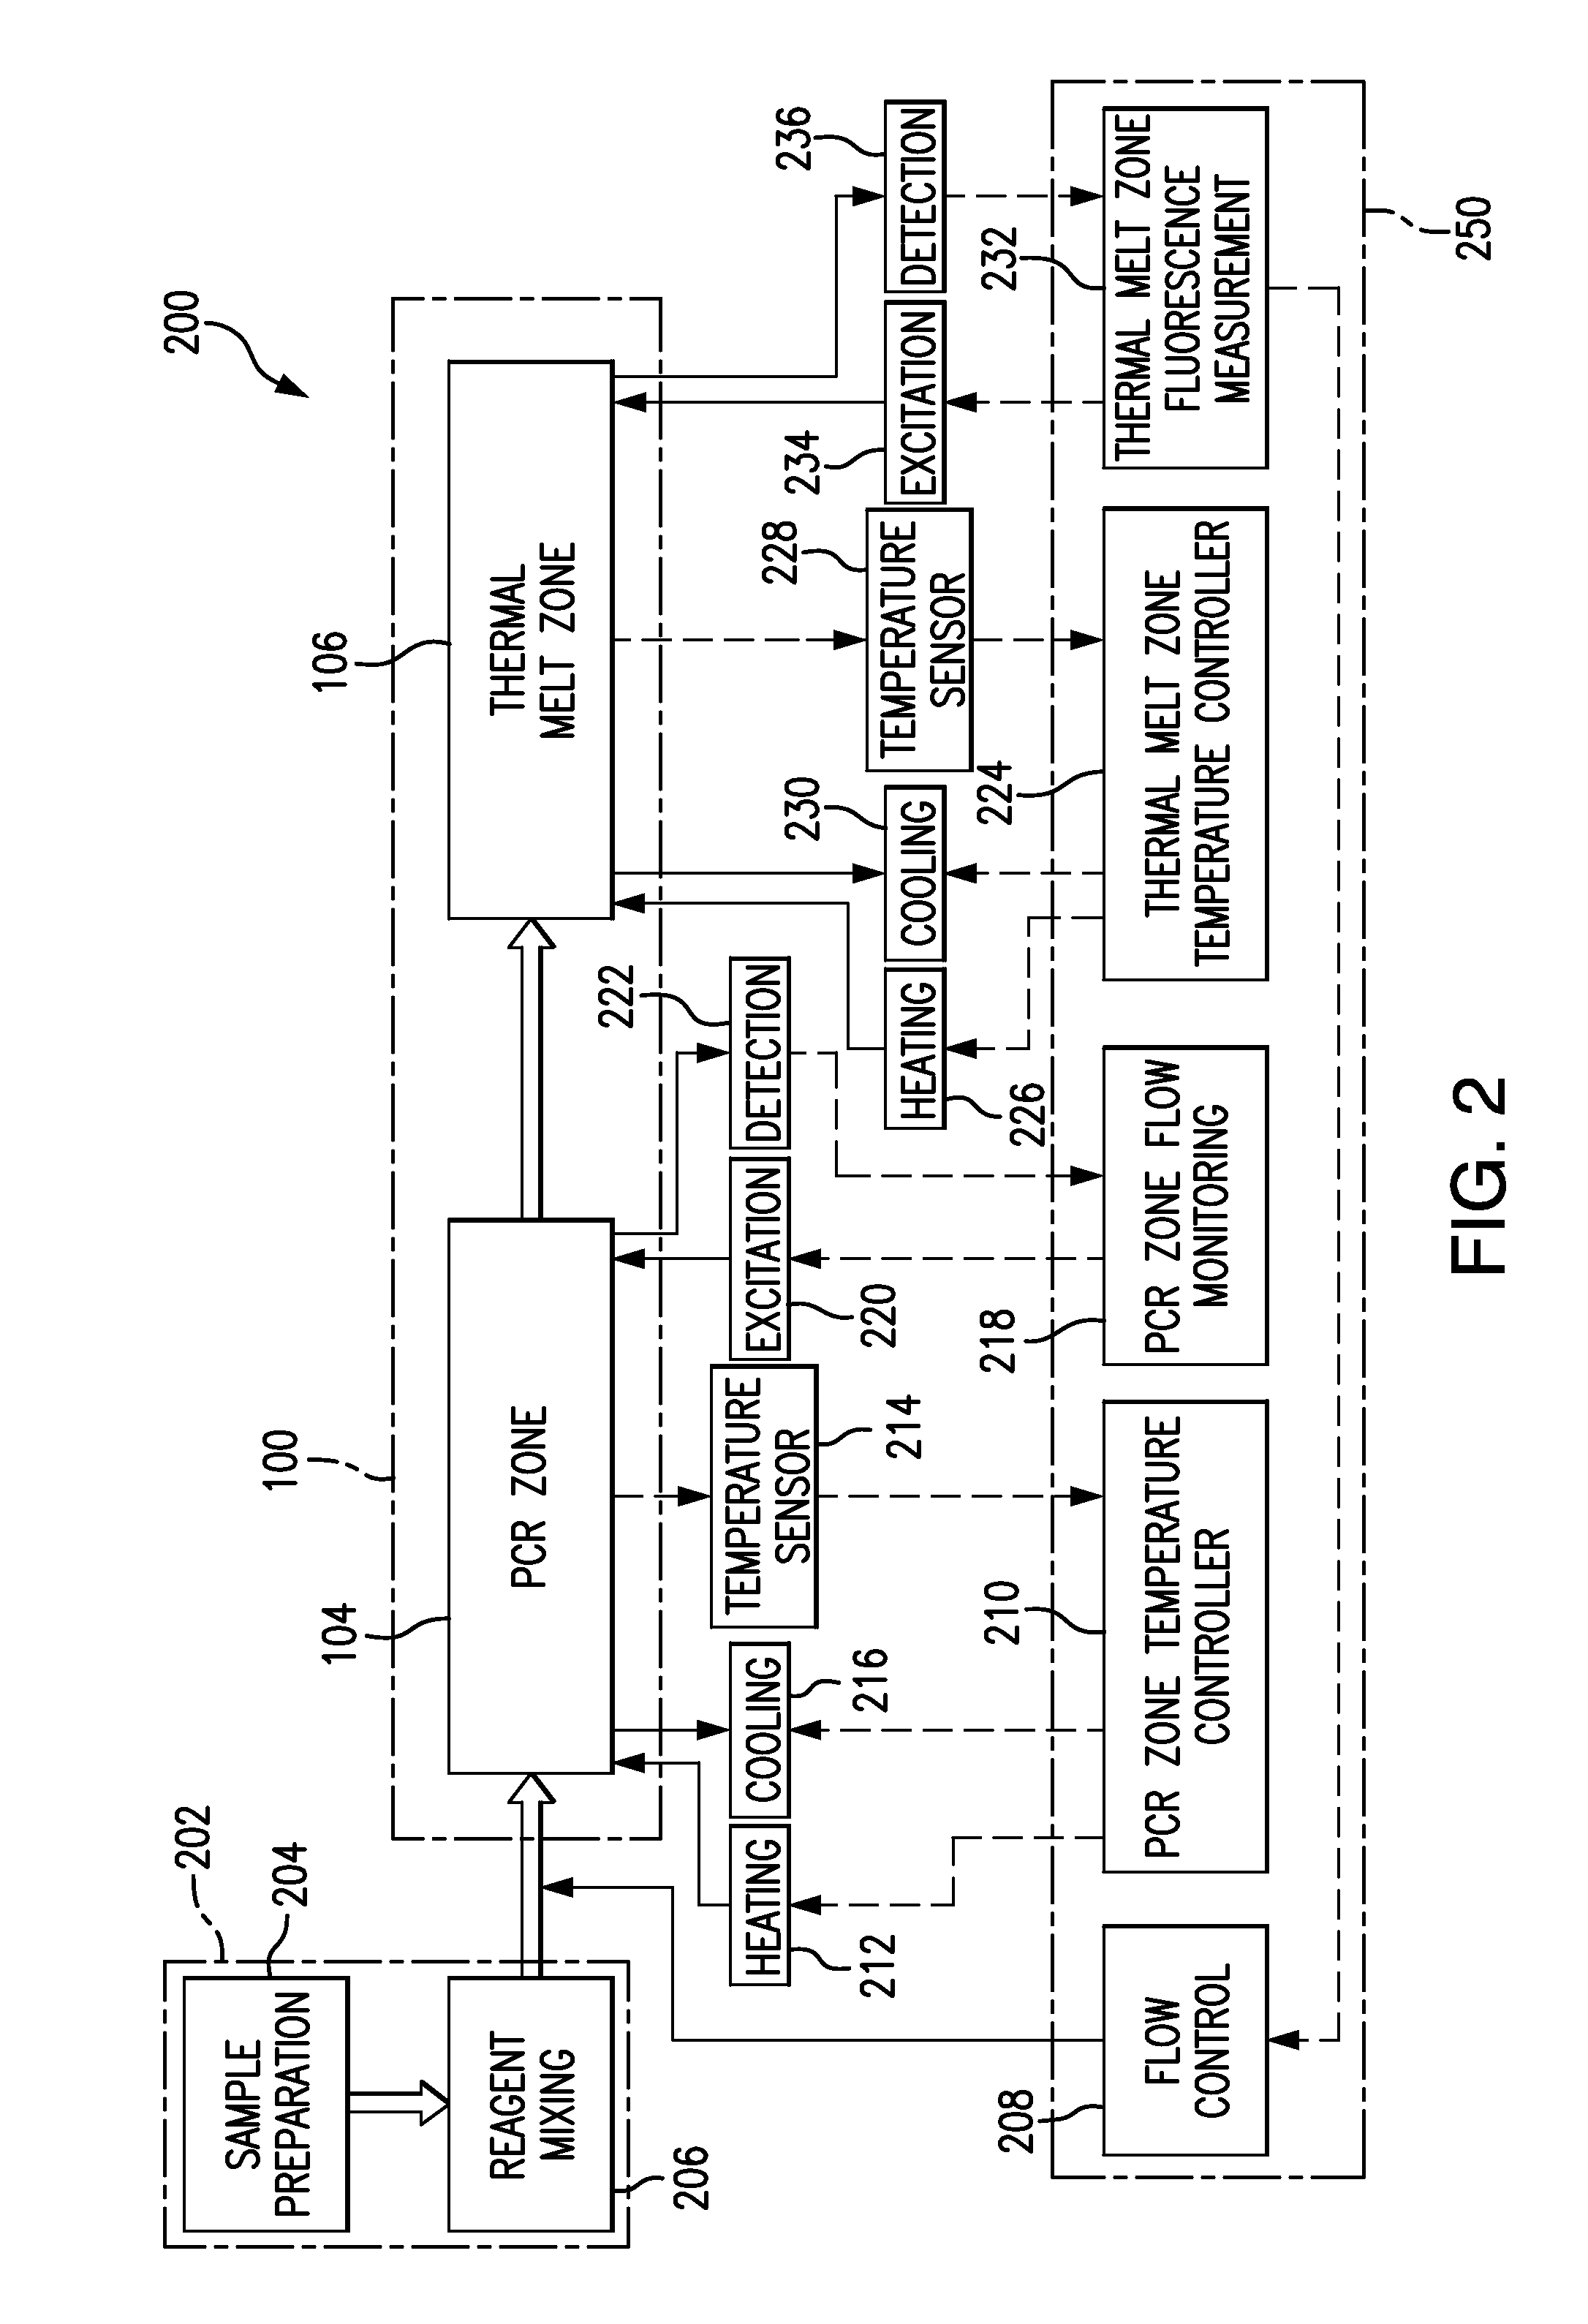 Compound calibrator for thermal sensors